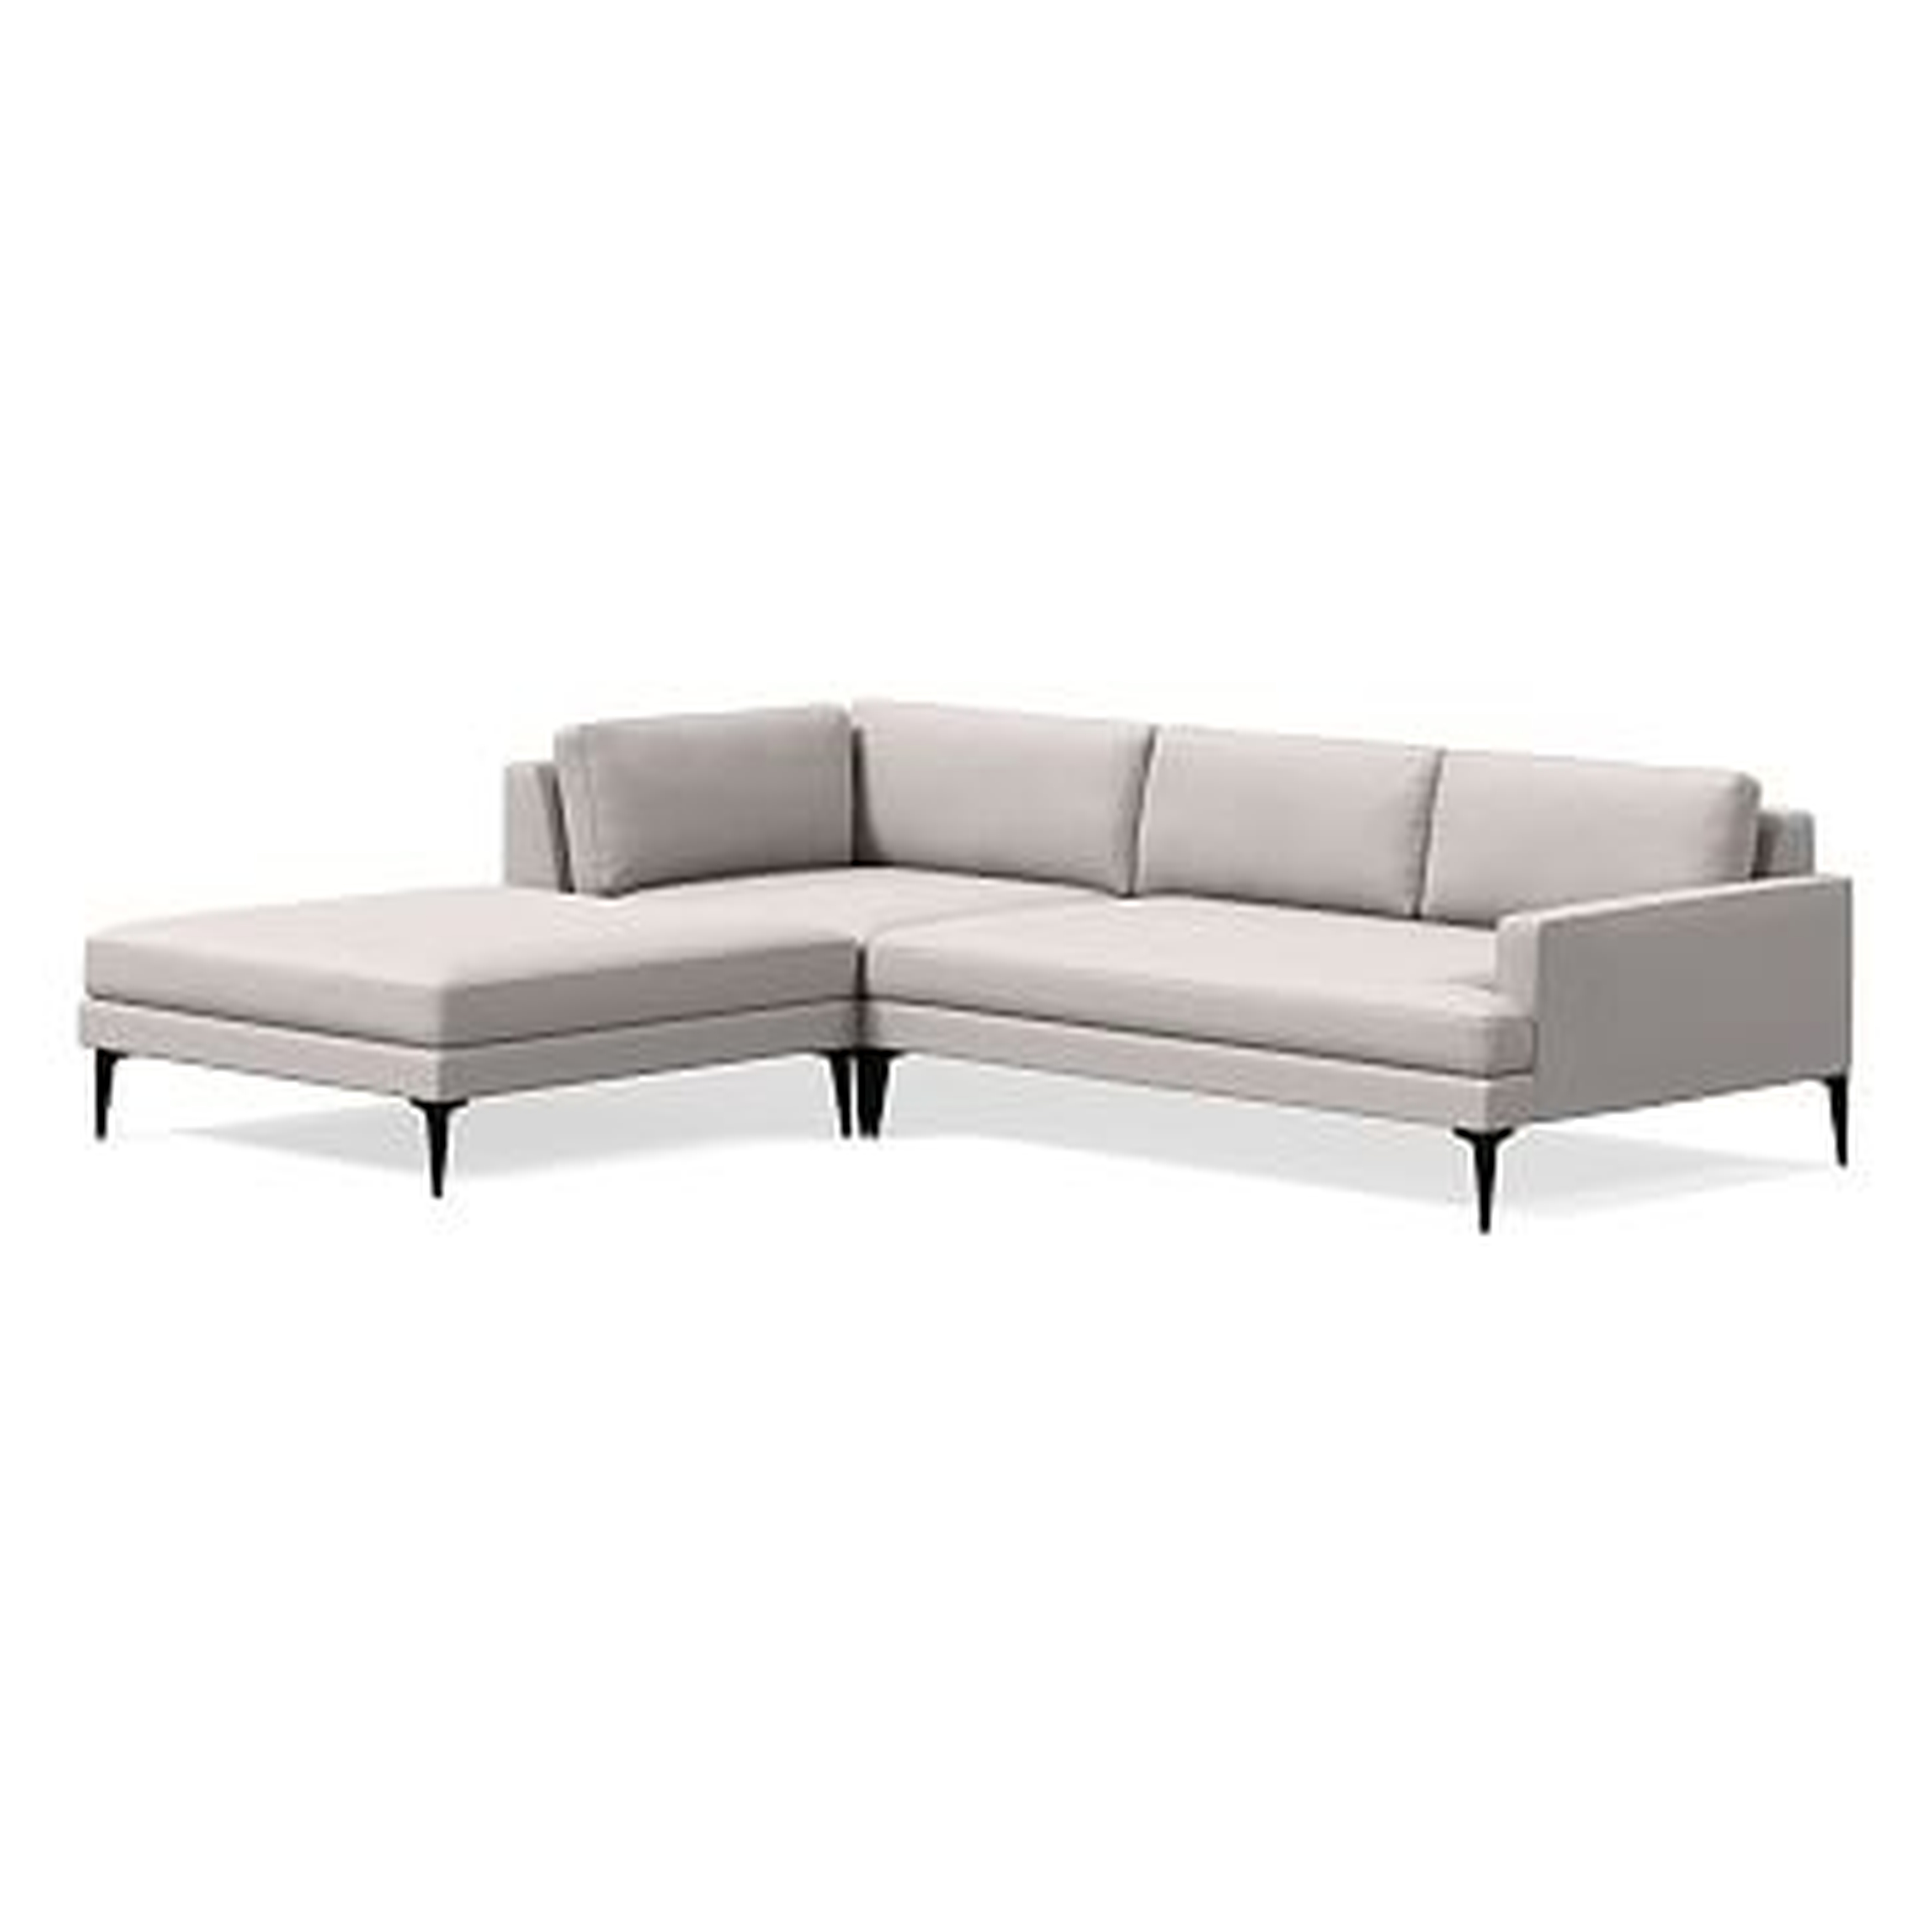 Andes Sectional Set 22: XL Right Arm 2.5 Seater Sofa, XL Corner, XL Ottoman, Poly, Marled Microfiber, Ash Gray, Dark Pewter - West Elm